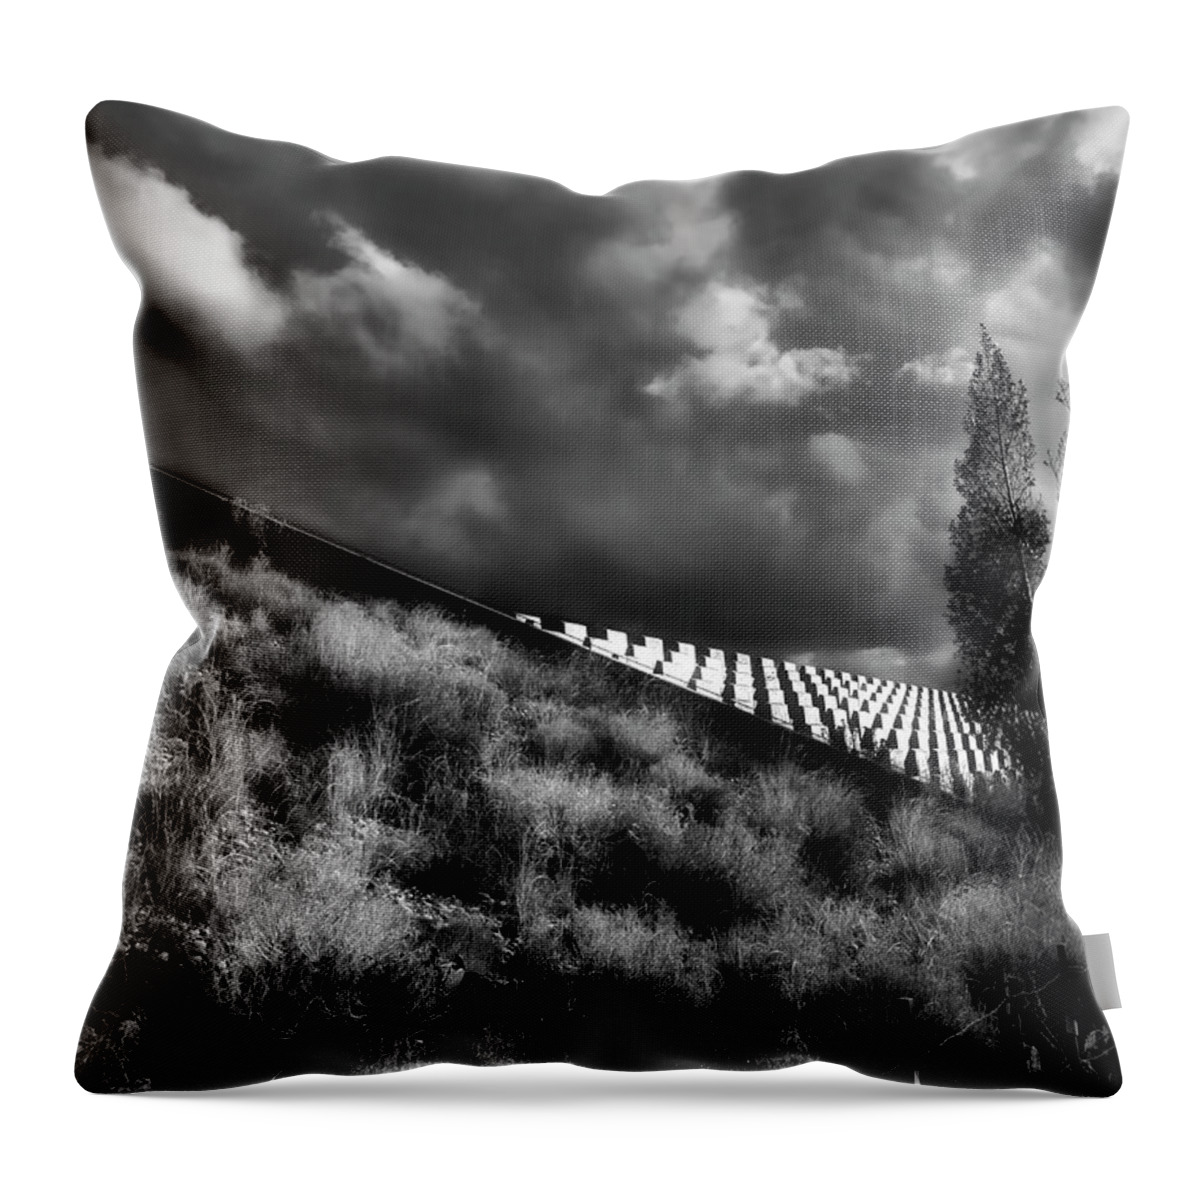 Albuquerque Throw Pillow featuring the photograph Gathering Storm by Mark David Gerson